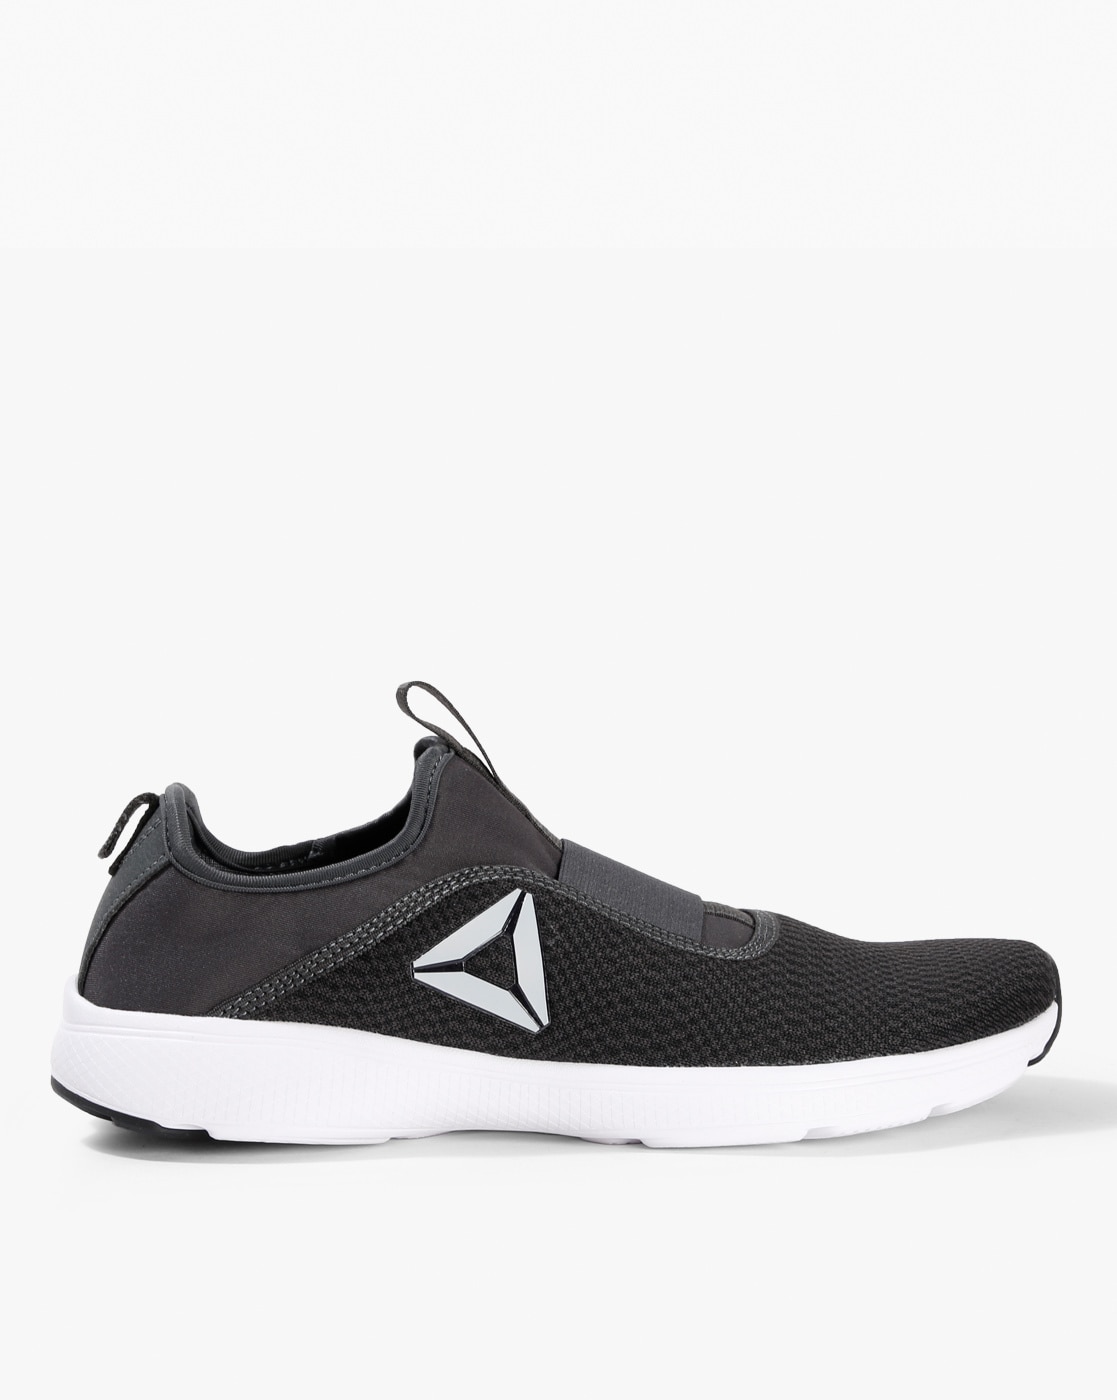 Buy Grey Sports Shoes for Men by reebok 